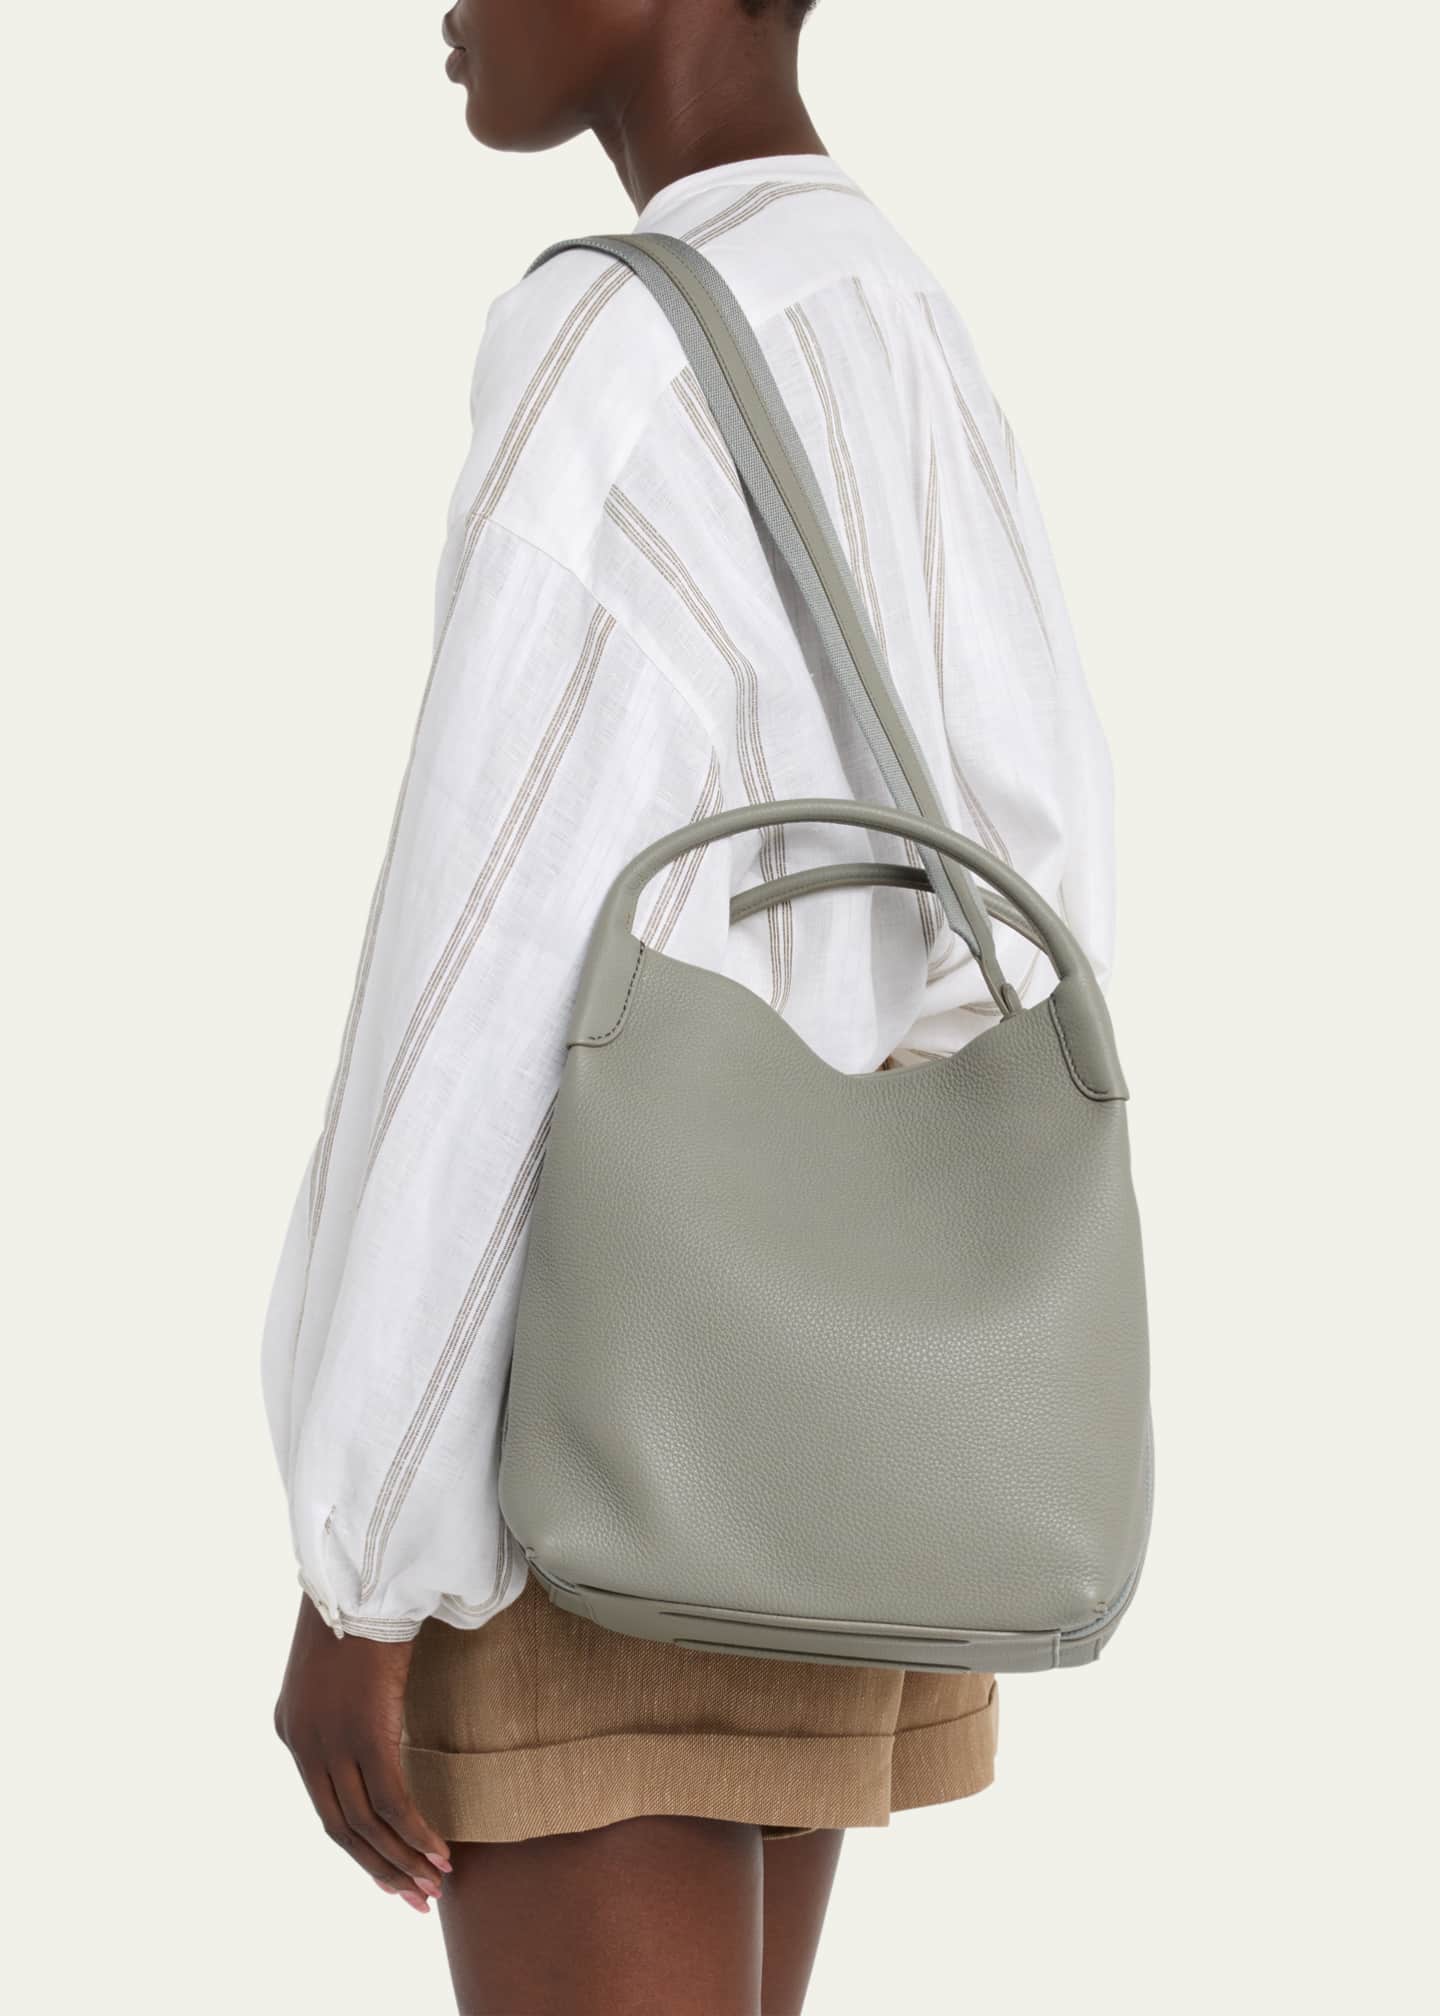 Loro Piana's Bale Bag Is a Heritage-heavy Statement Piece